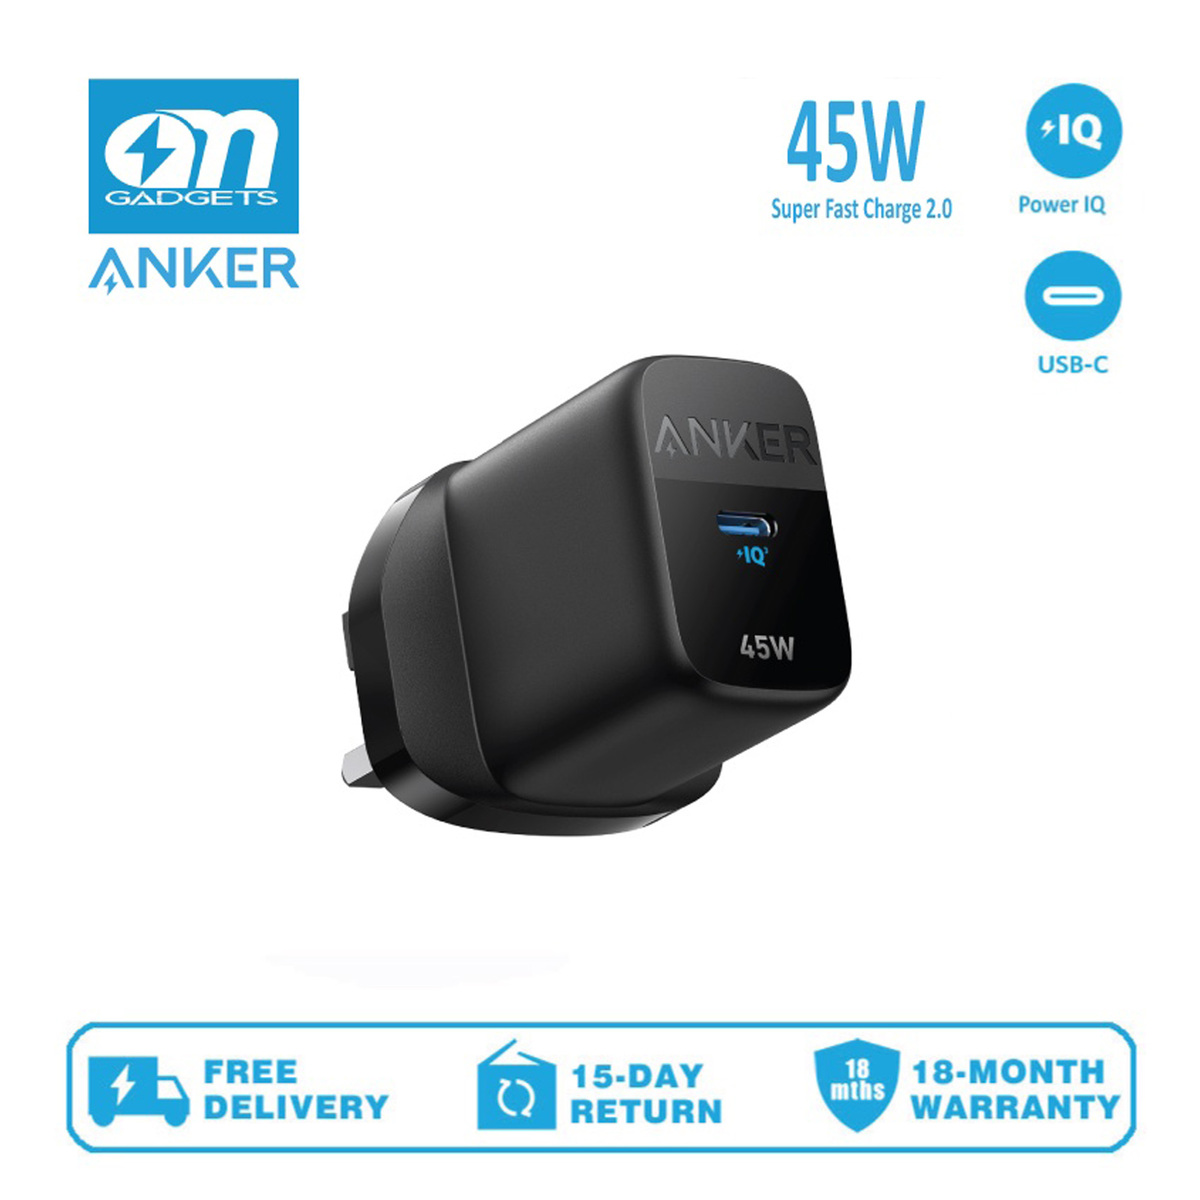 Anker USB-C Super Fast Charging Ace Charger, 45 W, Black, A2643